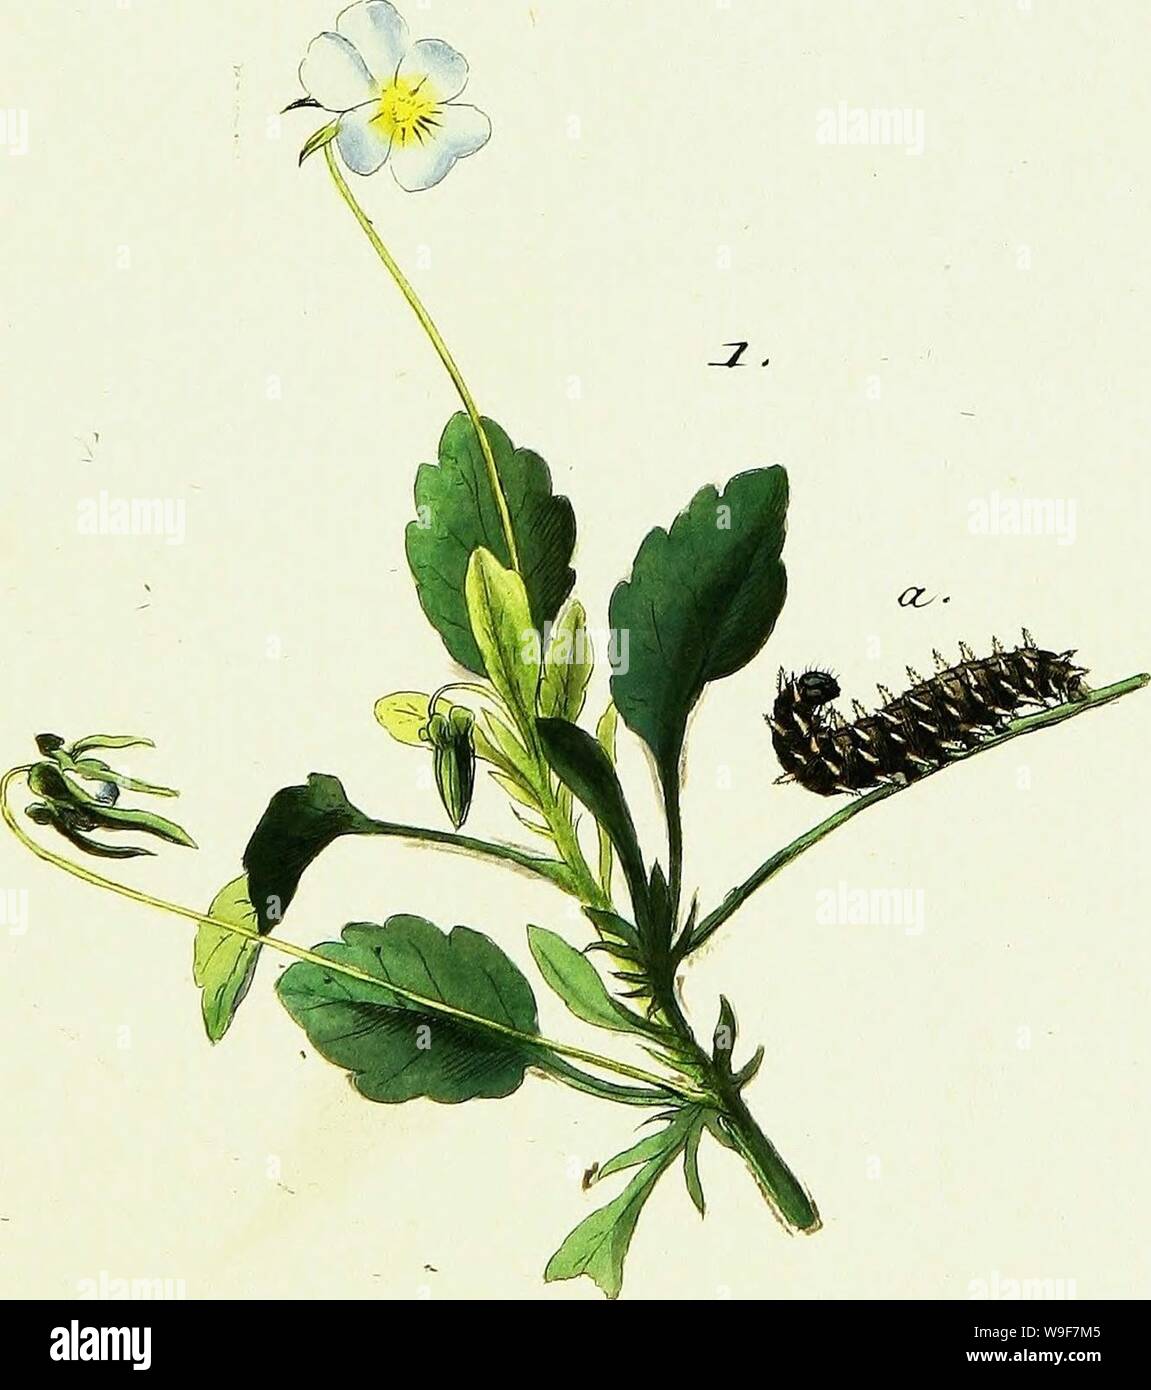 Archive image from page 20 of Geschichte europäischer Schmetterlinge (1806). Geschichte europäischer Schmetterlinge  CUbiodiversity1742385-9607 Year: 1806 ( 67) . a.Z. ctJu Stock Photo